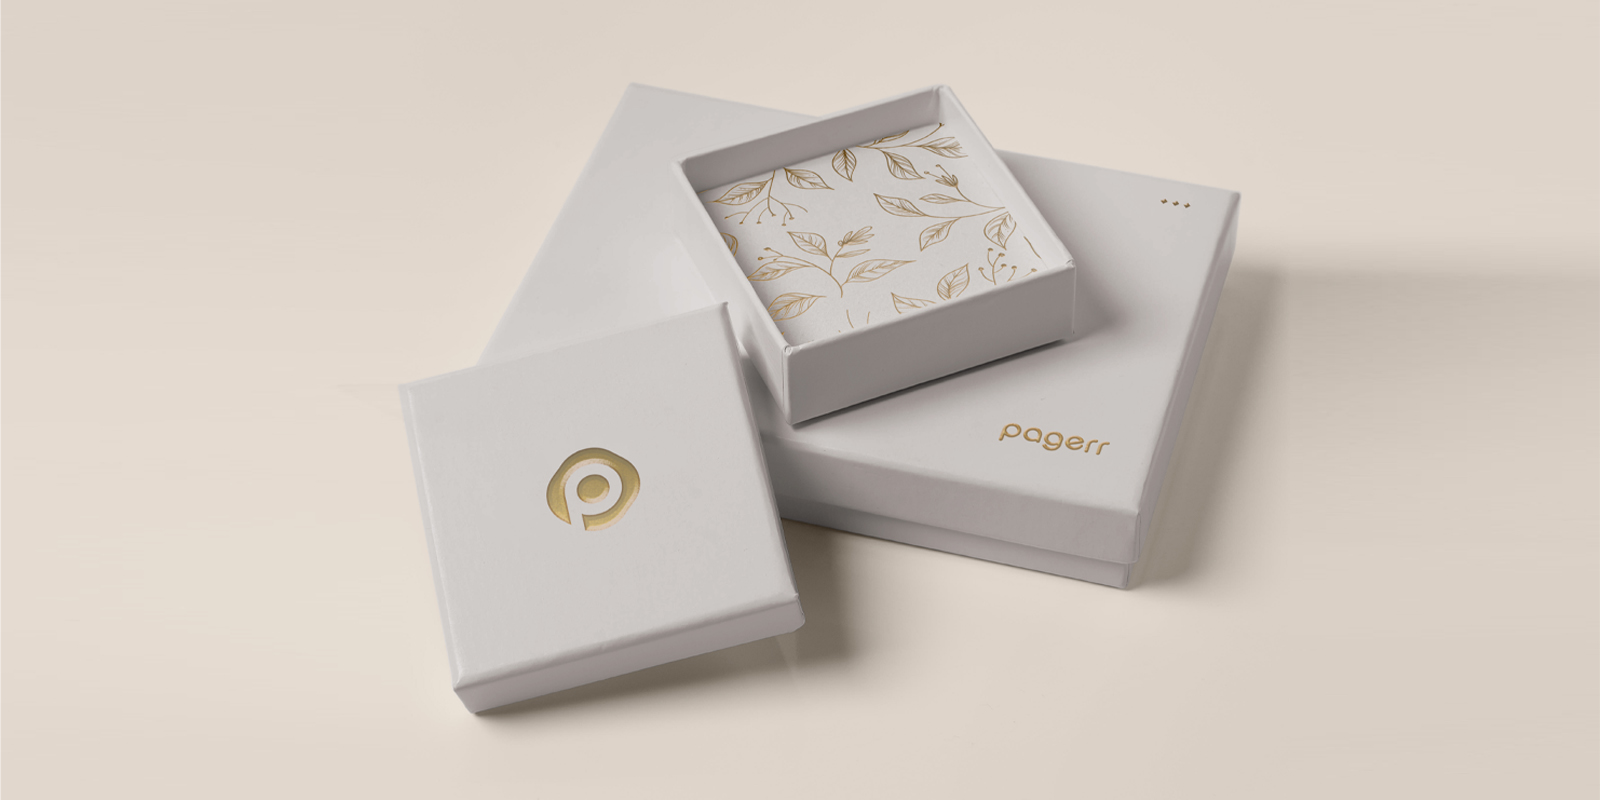 Product boxes in Canberra - Print with Pagerr